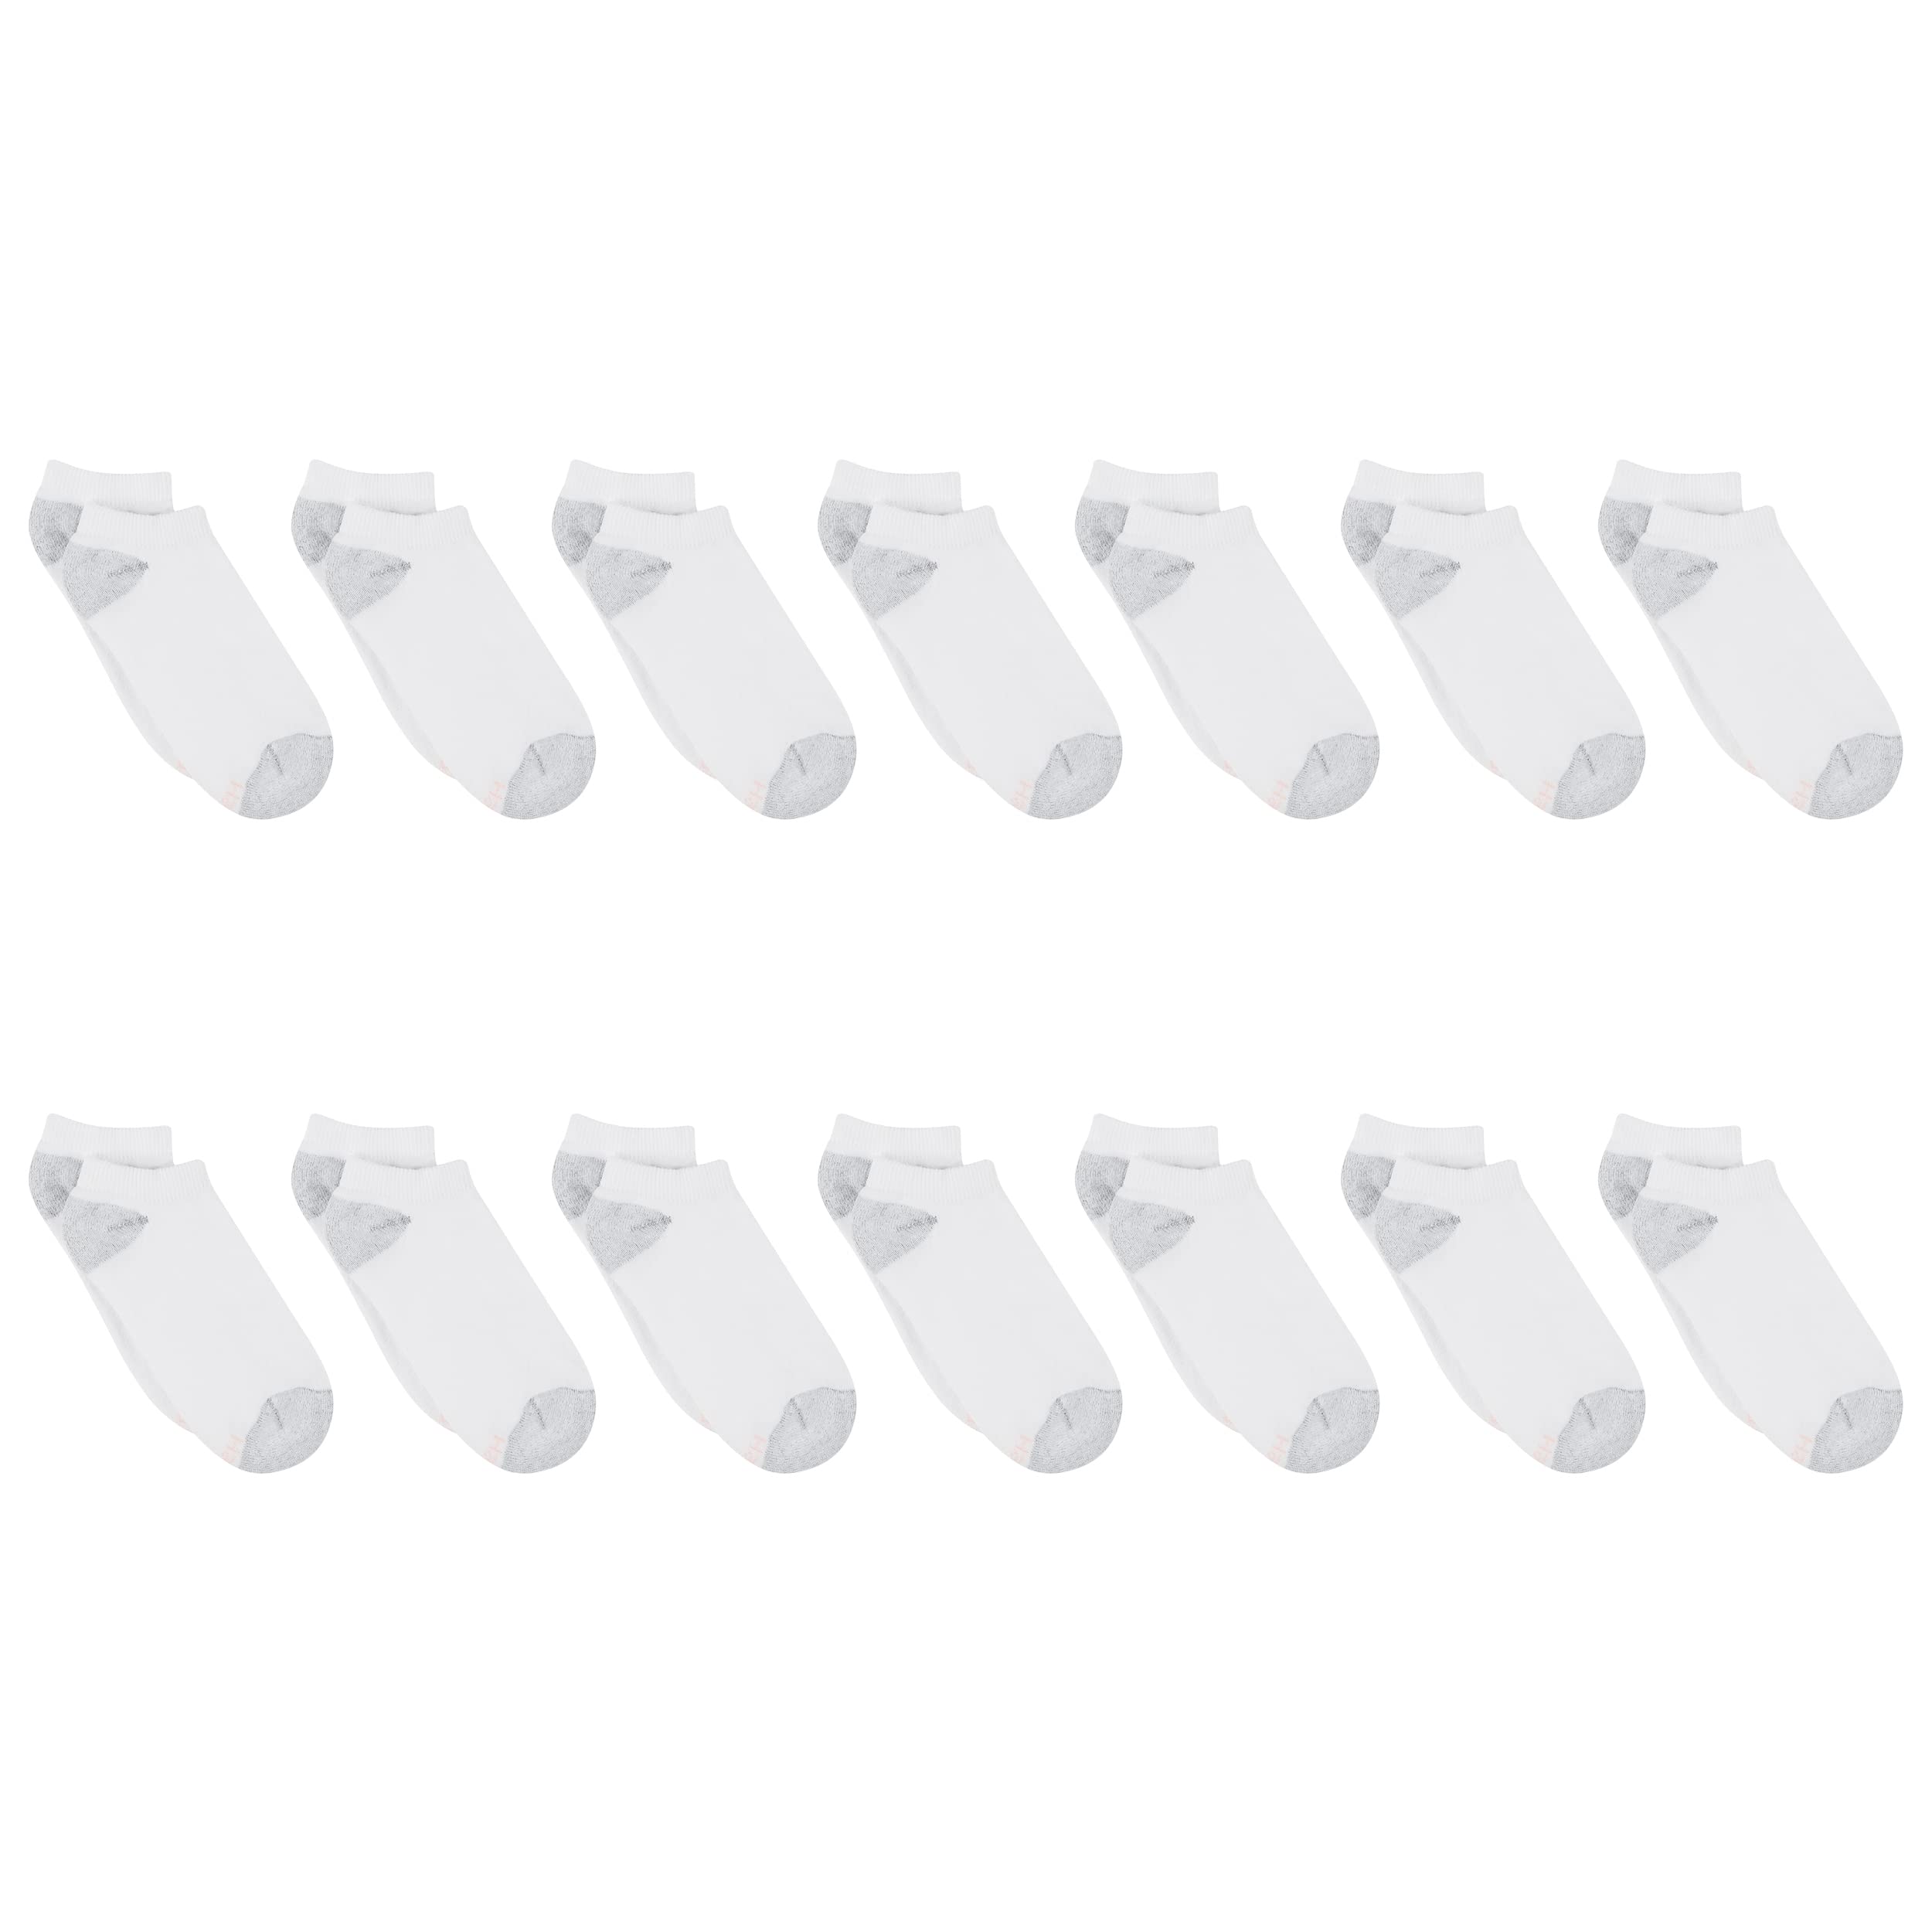 Hanes Women's Value, Show Soft Moisture-Wicking Socks, Available in 10 and 14-Packs